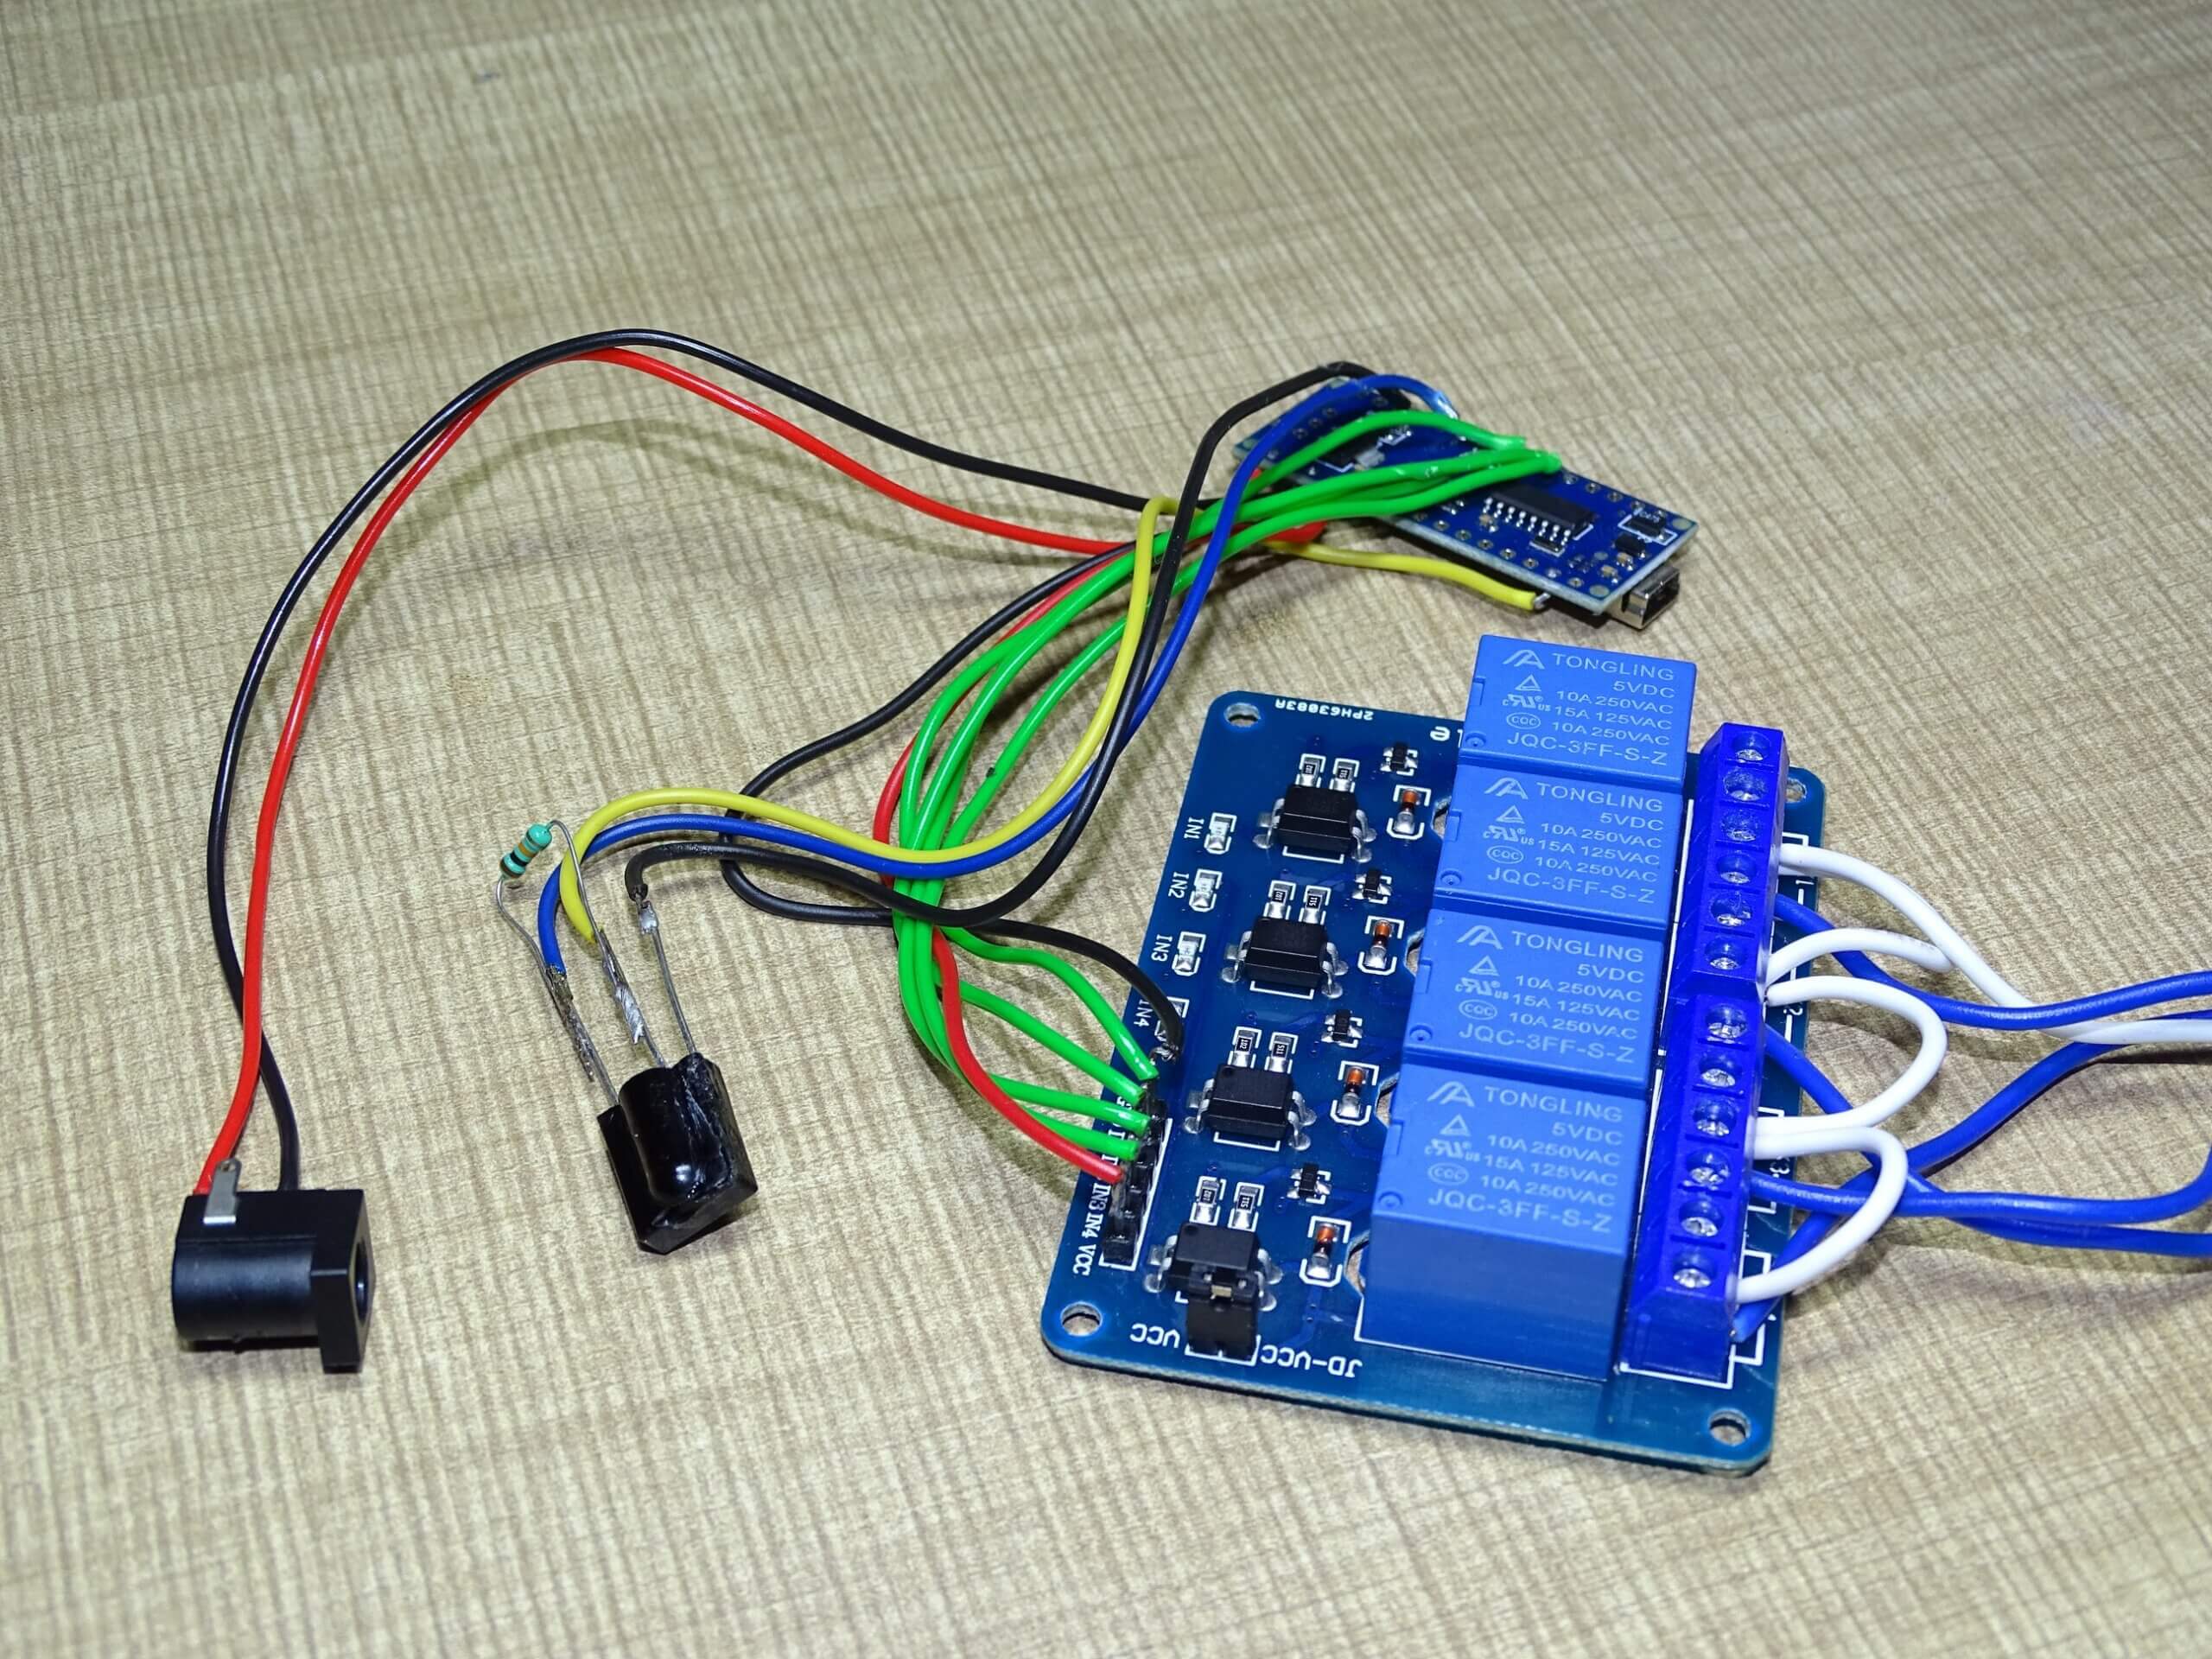 Arduino Home automation